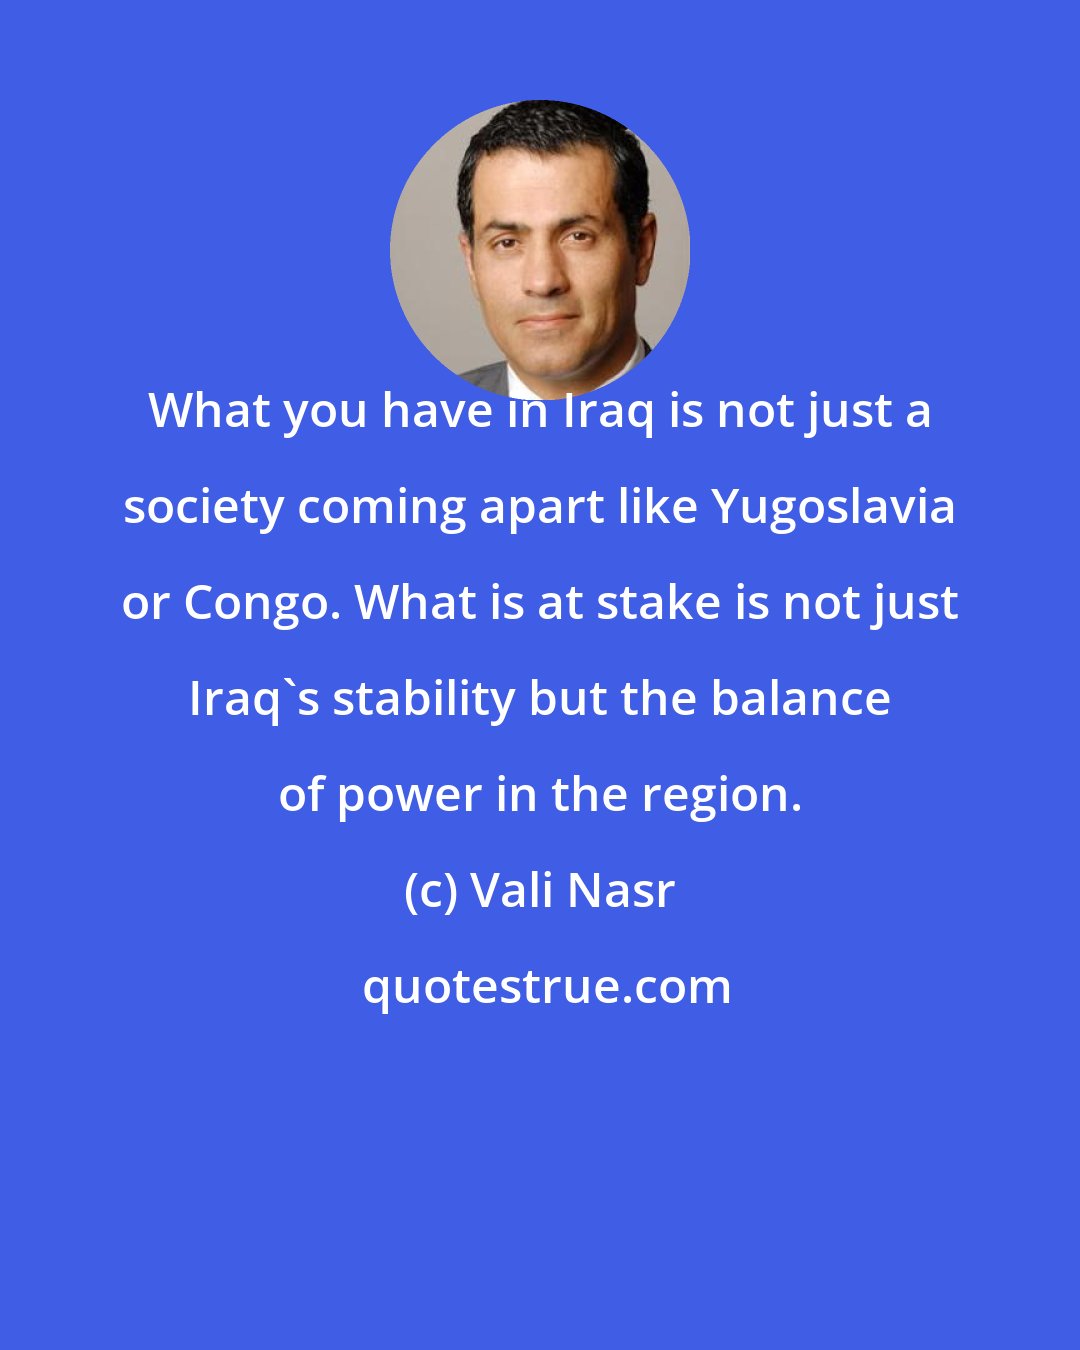 Vali Nasr: What you have in Iraq is not just a society coming apart like Yugoslavia or Congo. What is at stake is not just Iraq's stability but the balance of power in the region.